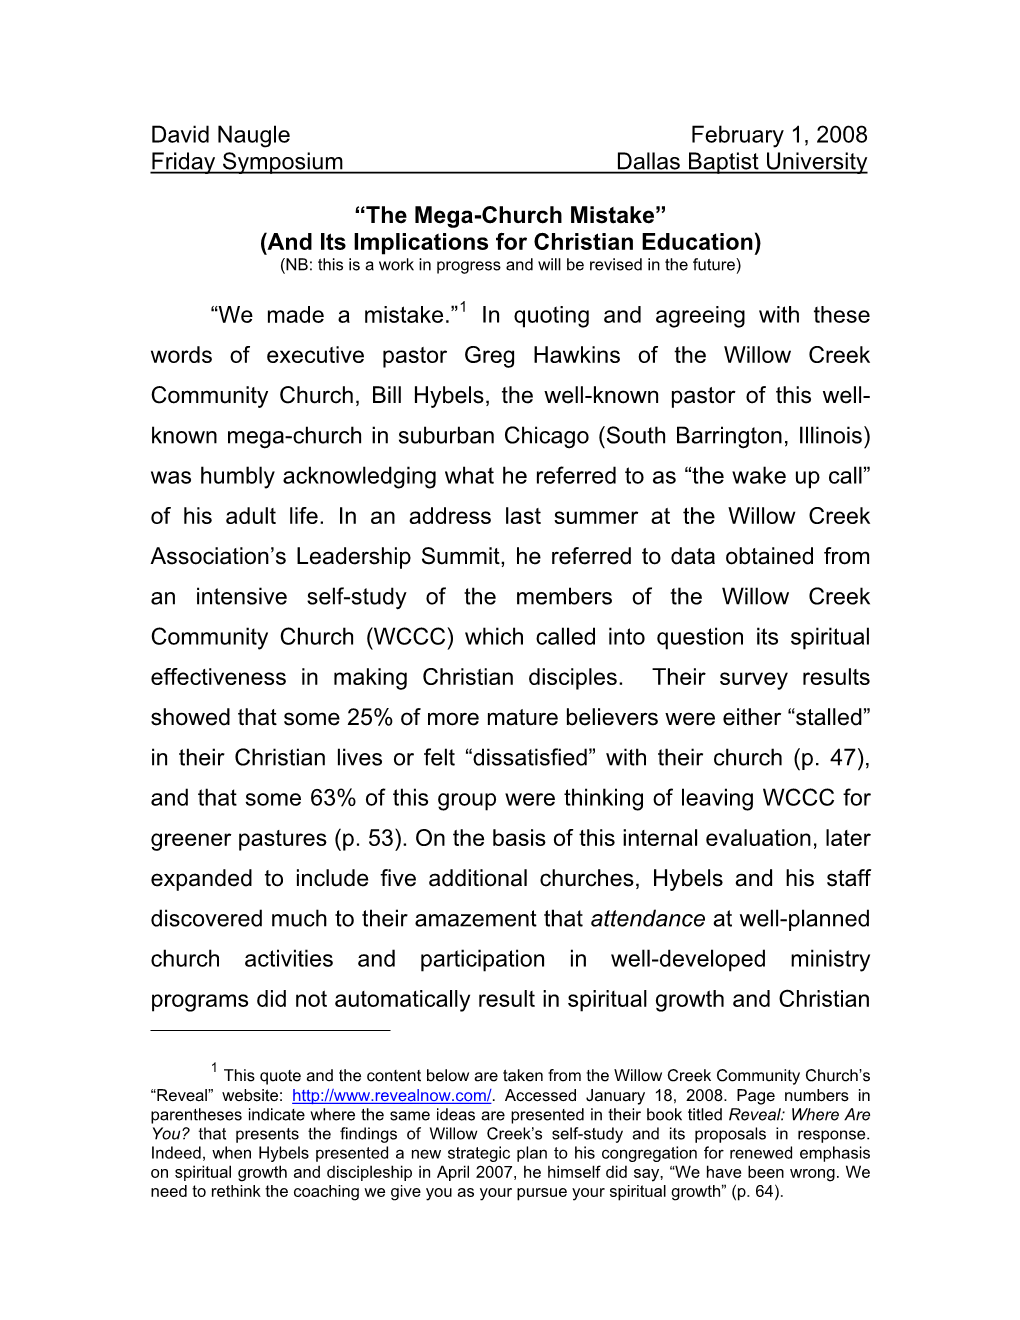 “The Mega-Church Mistake” (And Its Implications for Christian Education) (NB: This Is a Work in Progress and Will Be Revised in the Future)